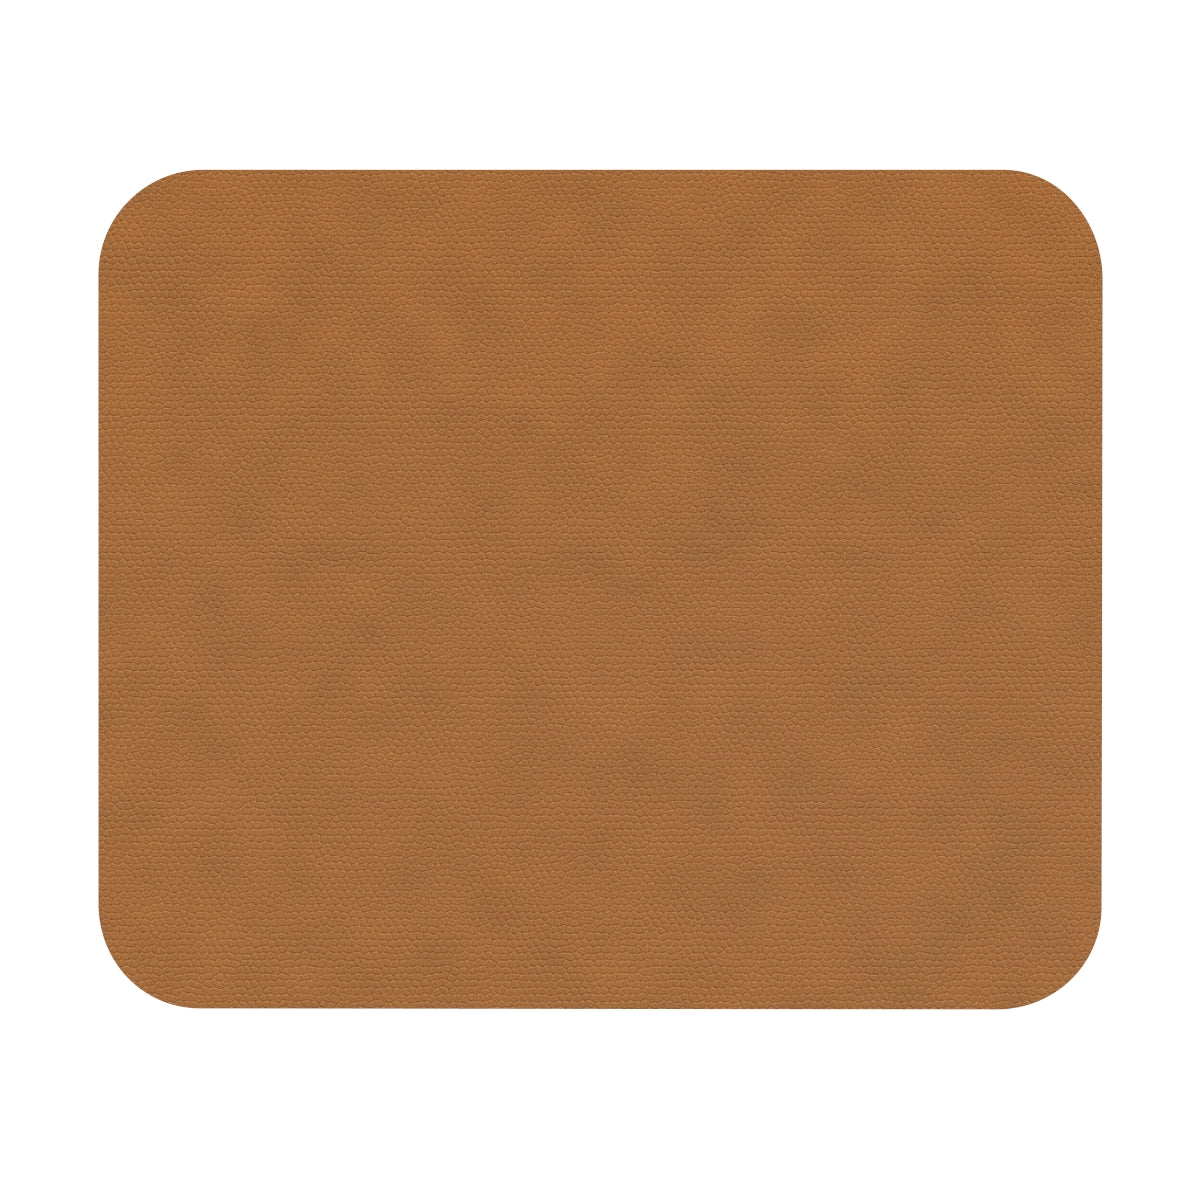 Sand Leather Print Rectangle Mouse Pad